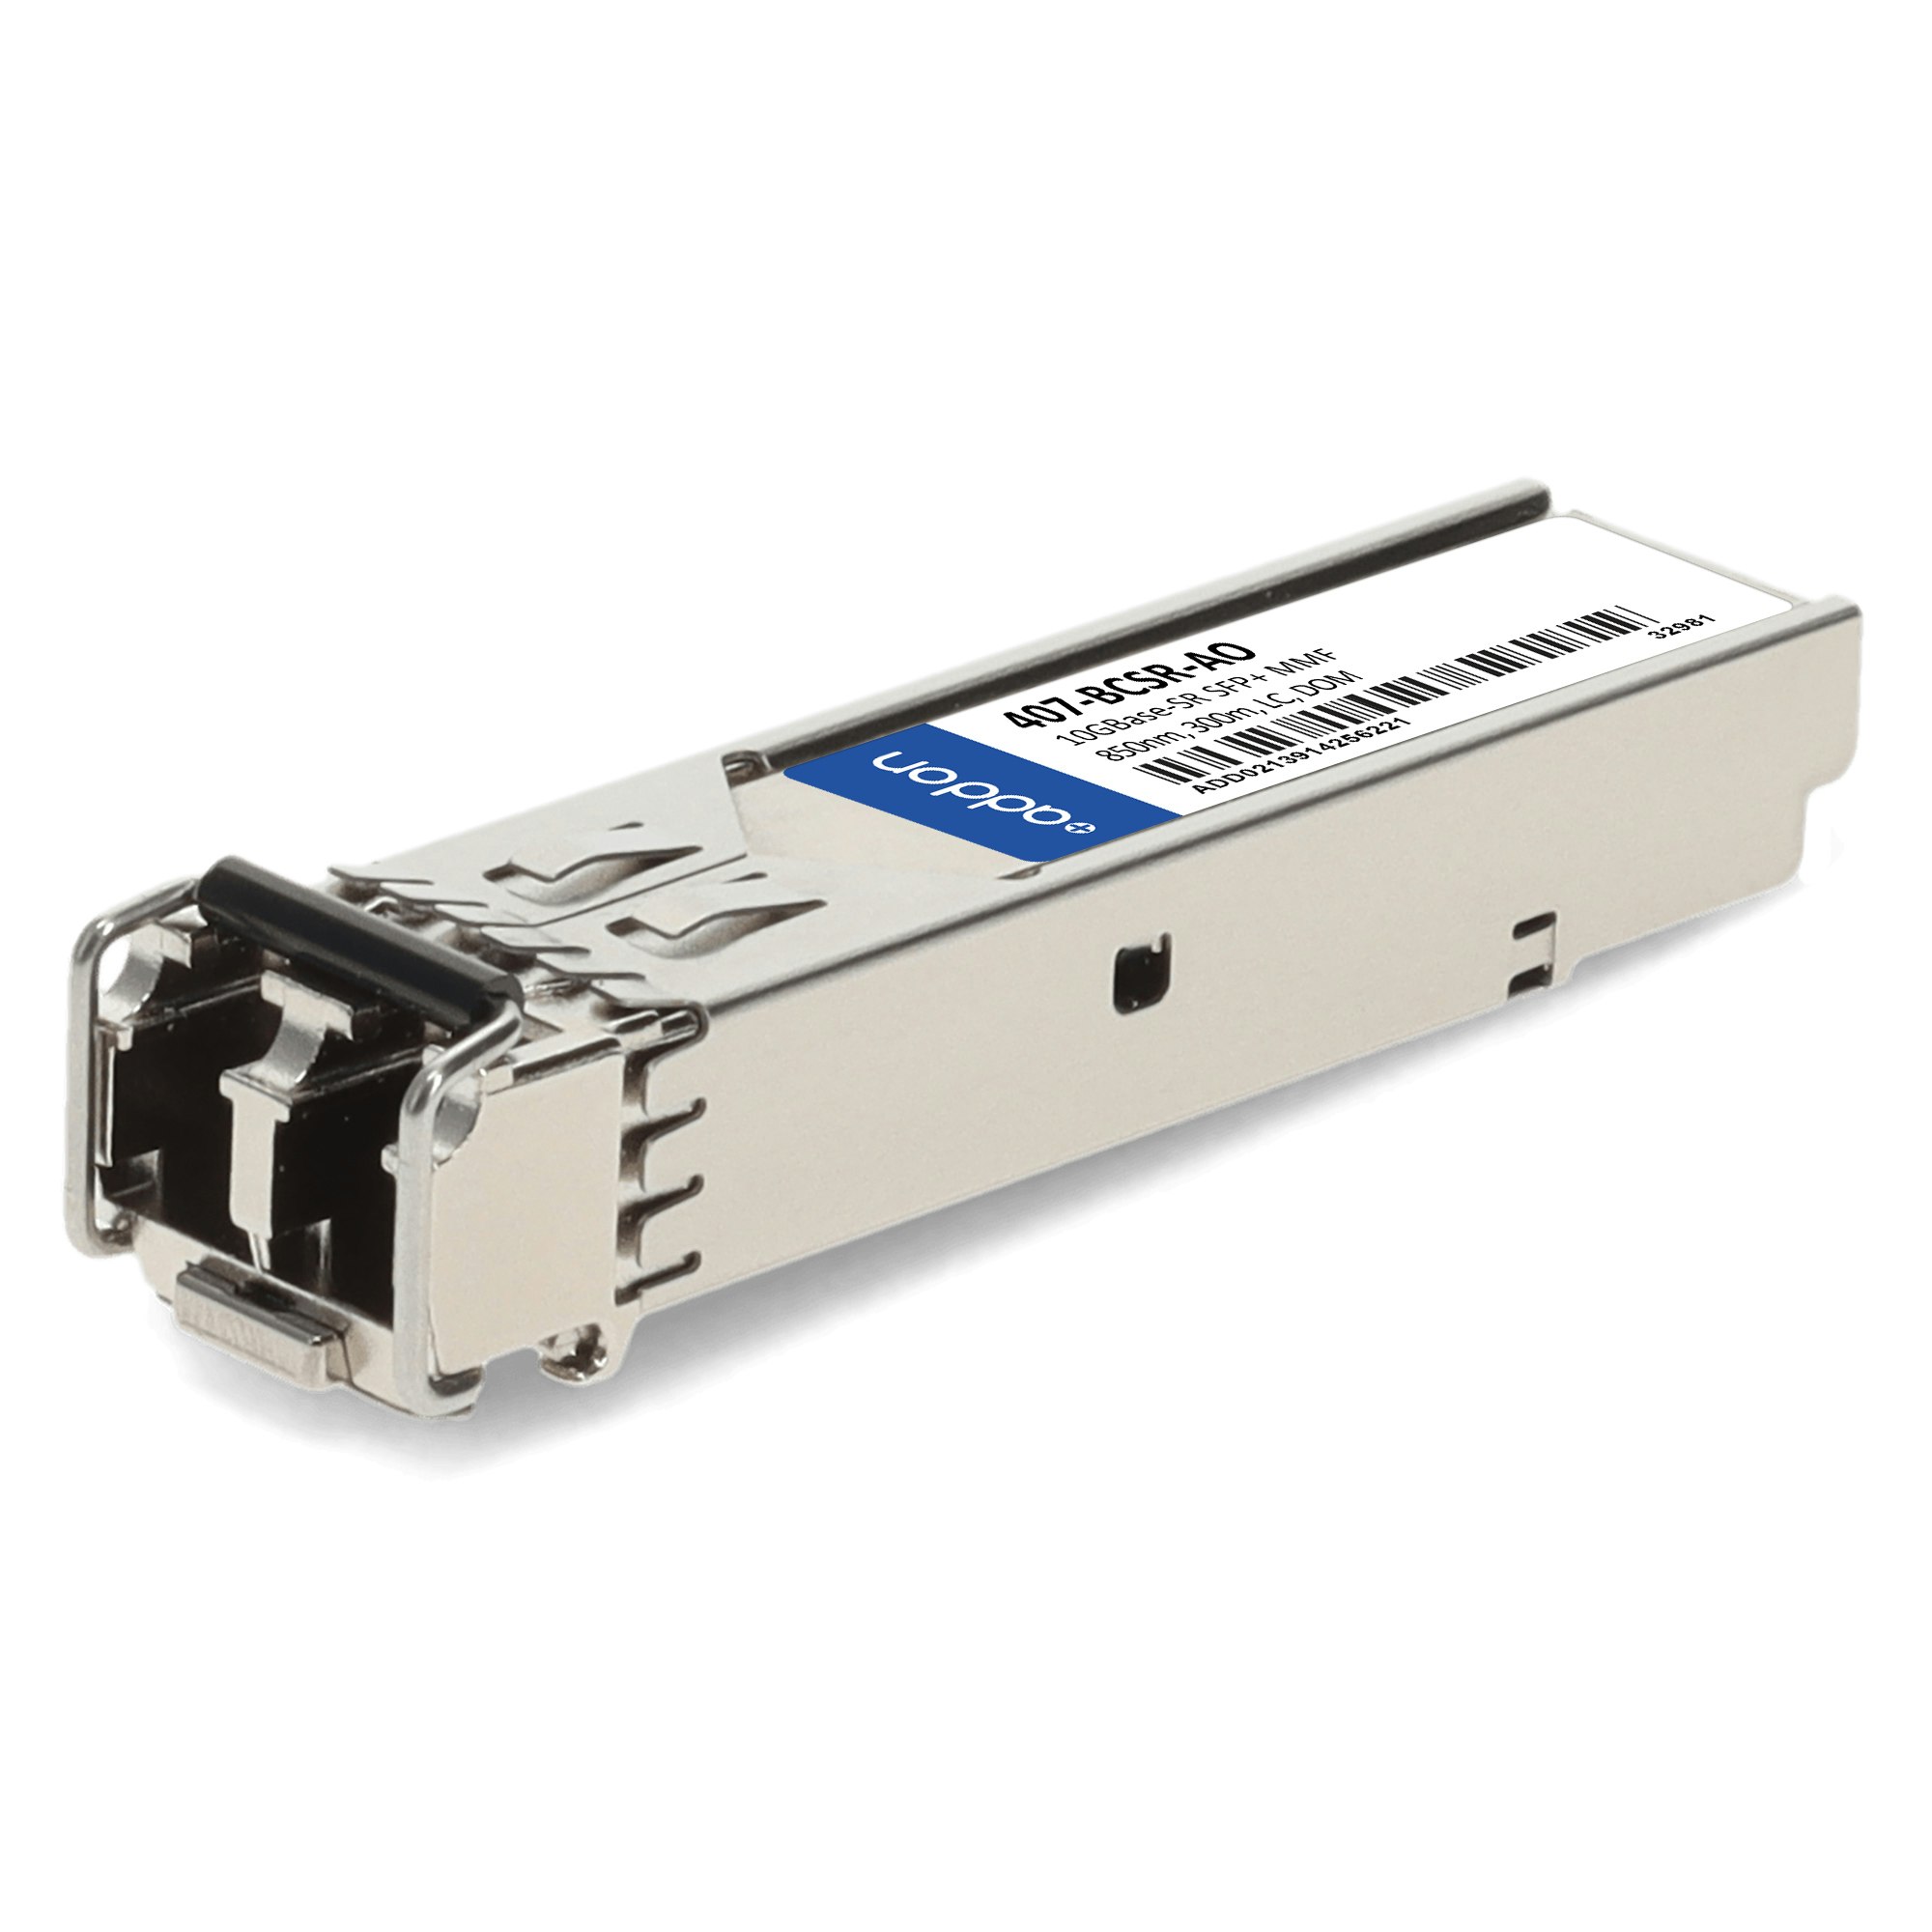 Compatible 407-BBRM SFP 10GBase-SR 300m for Dell PowerEdge R515 